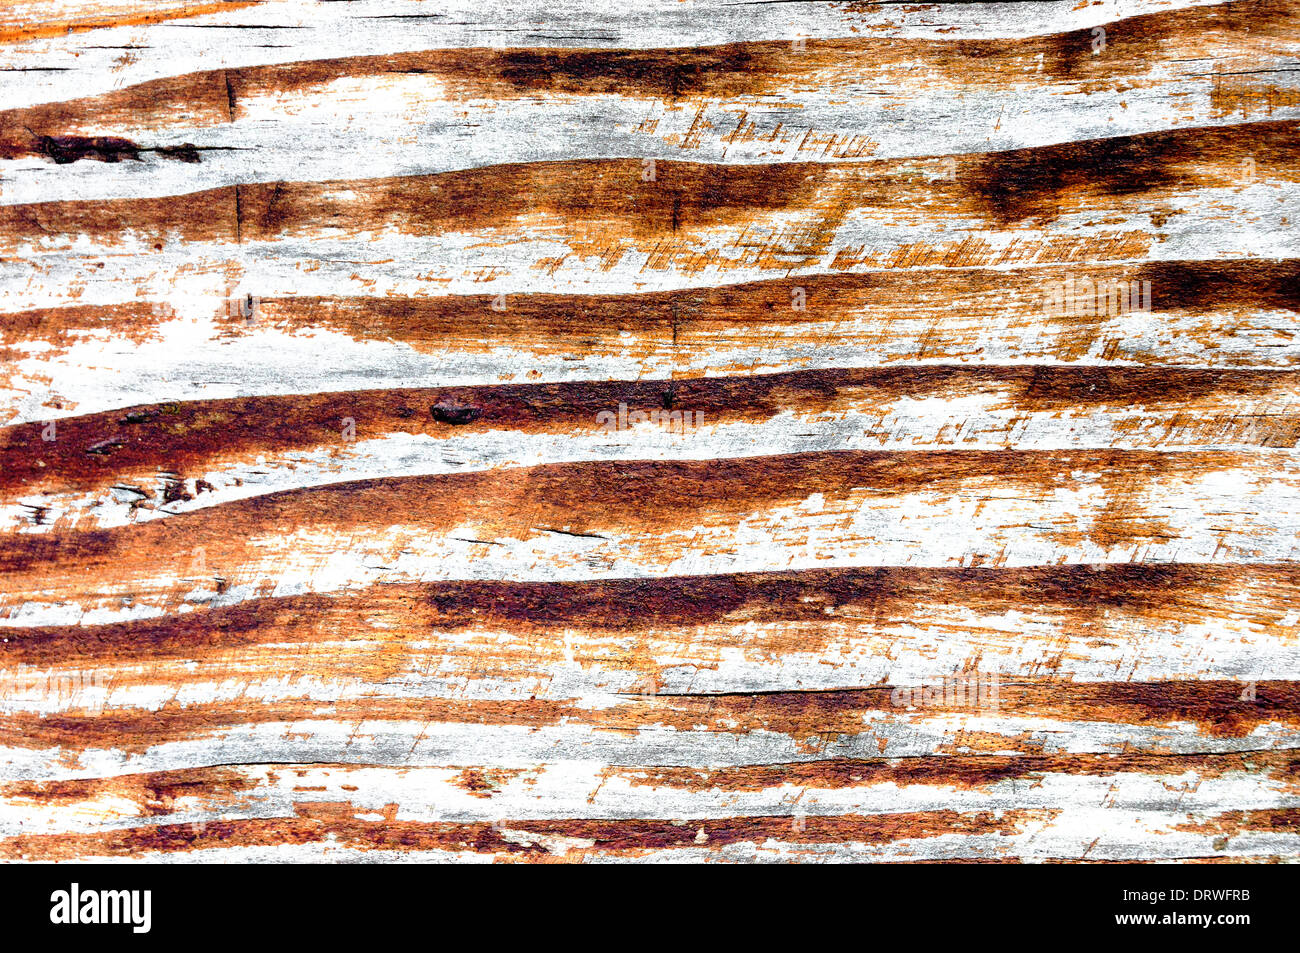 background of cracked and old wood textures Stock Photo